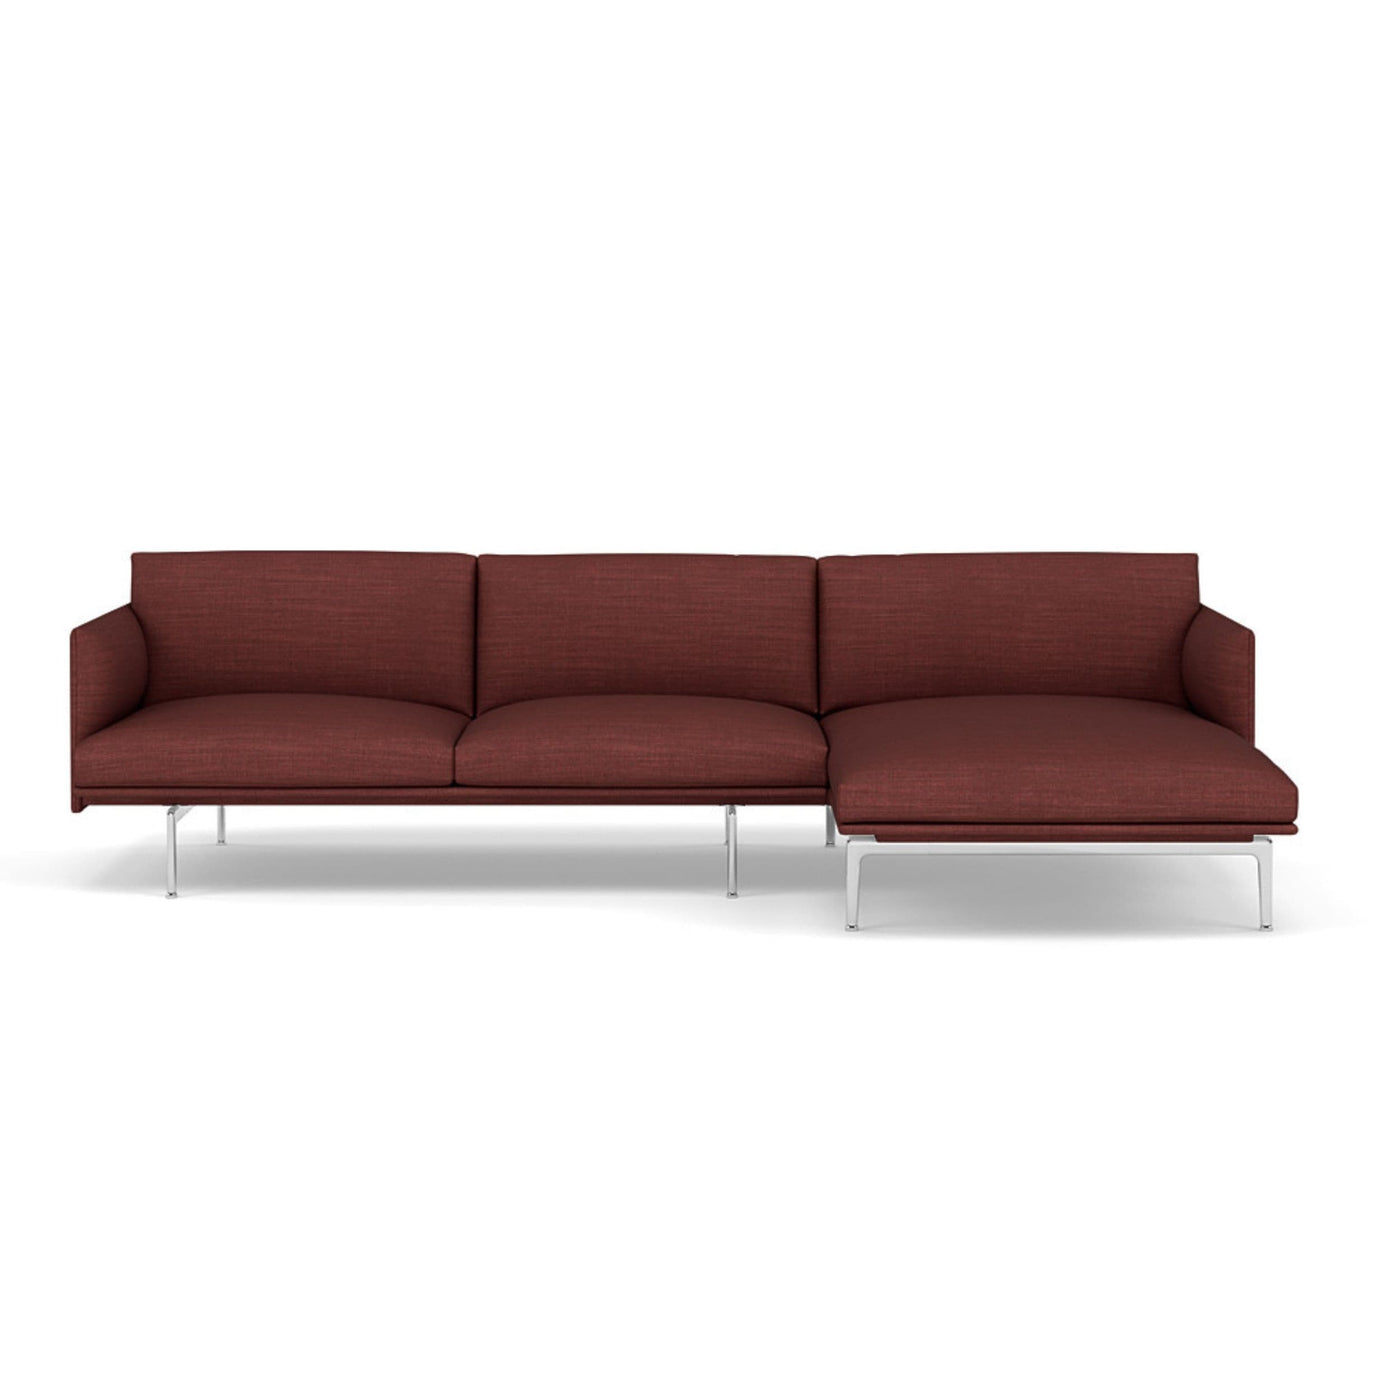 Muuto Outline Chaise Longue sofa in canvas 576. Made to order from someday designs. #colour_canvas-576-red